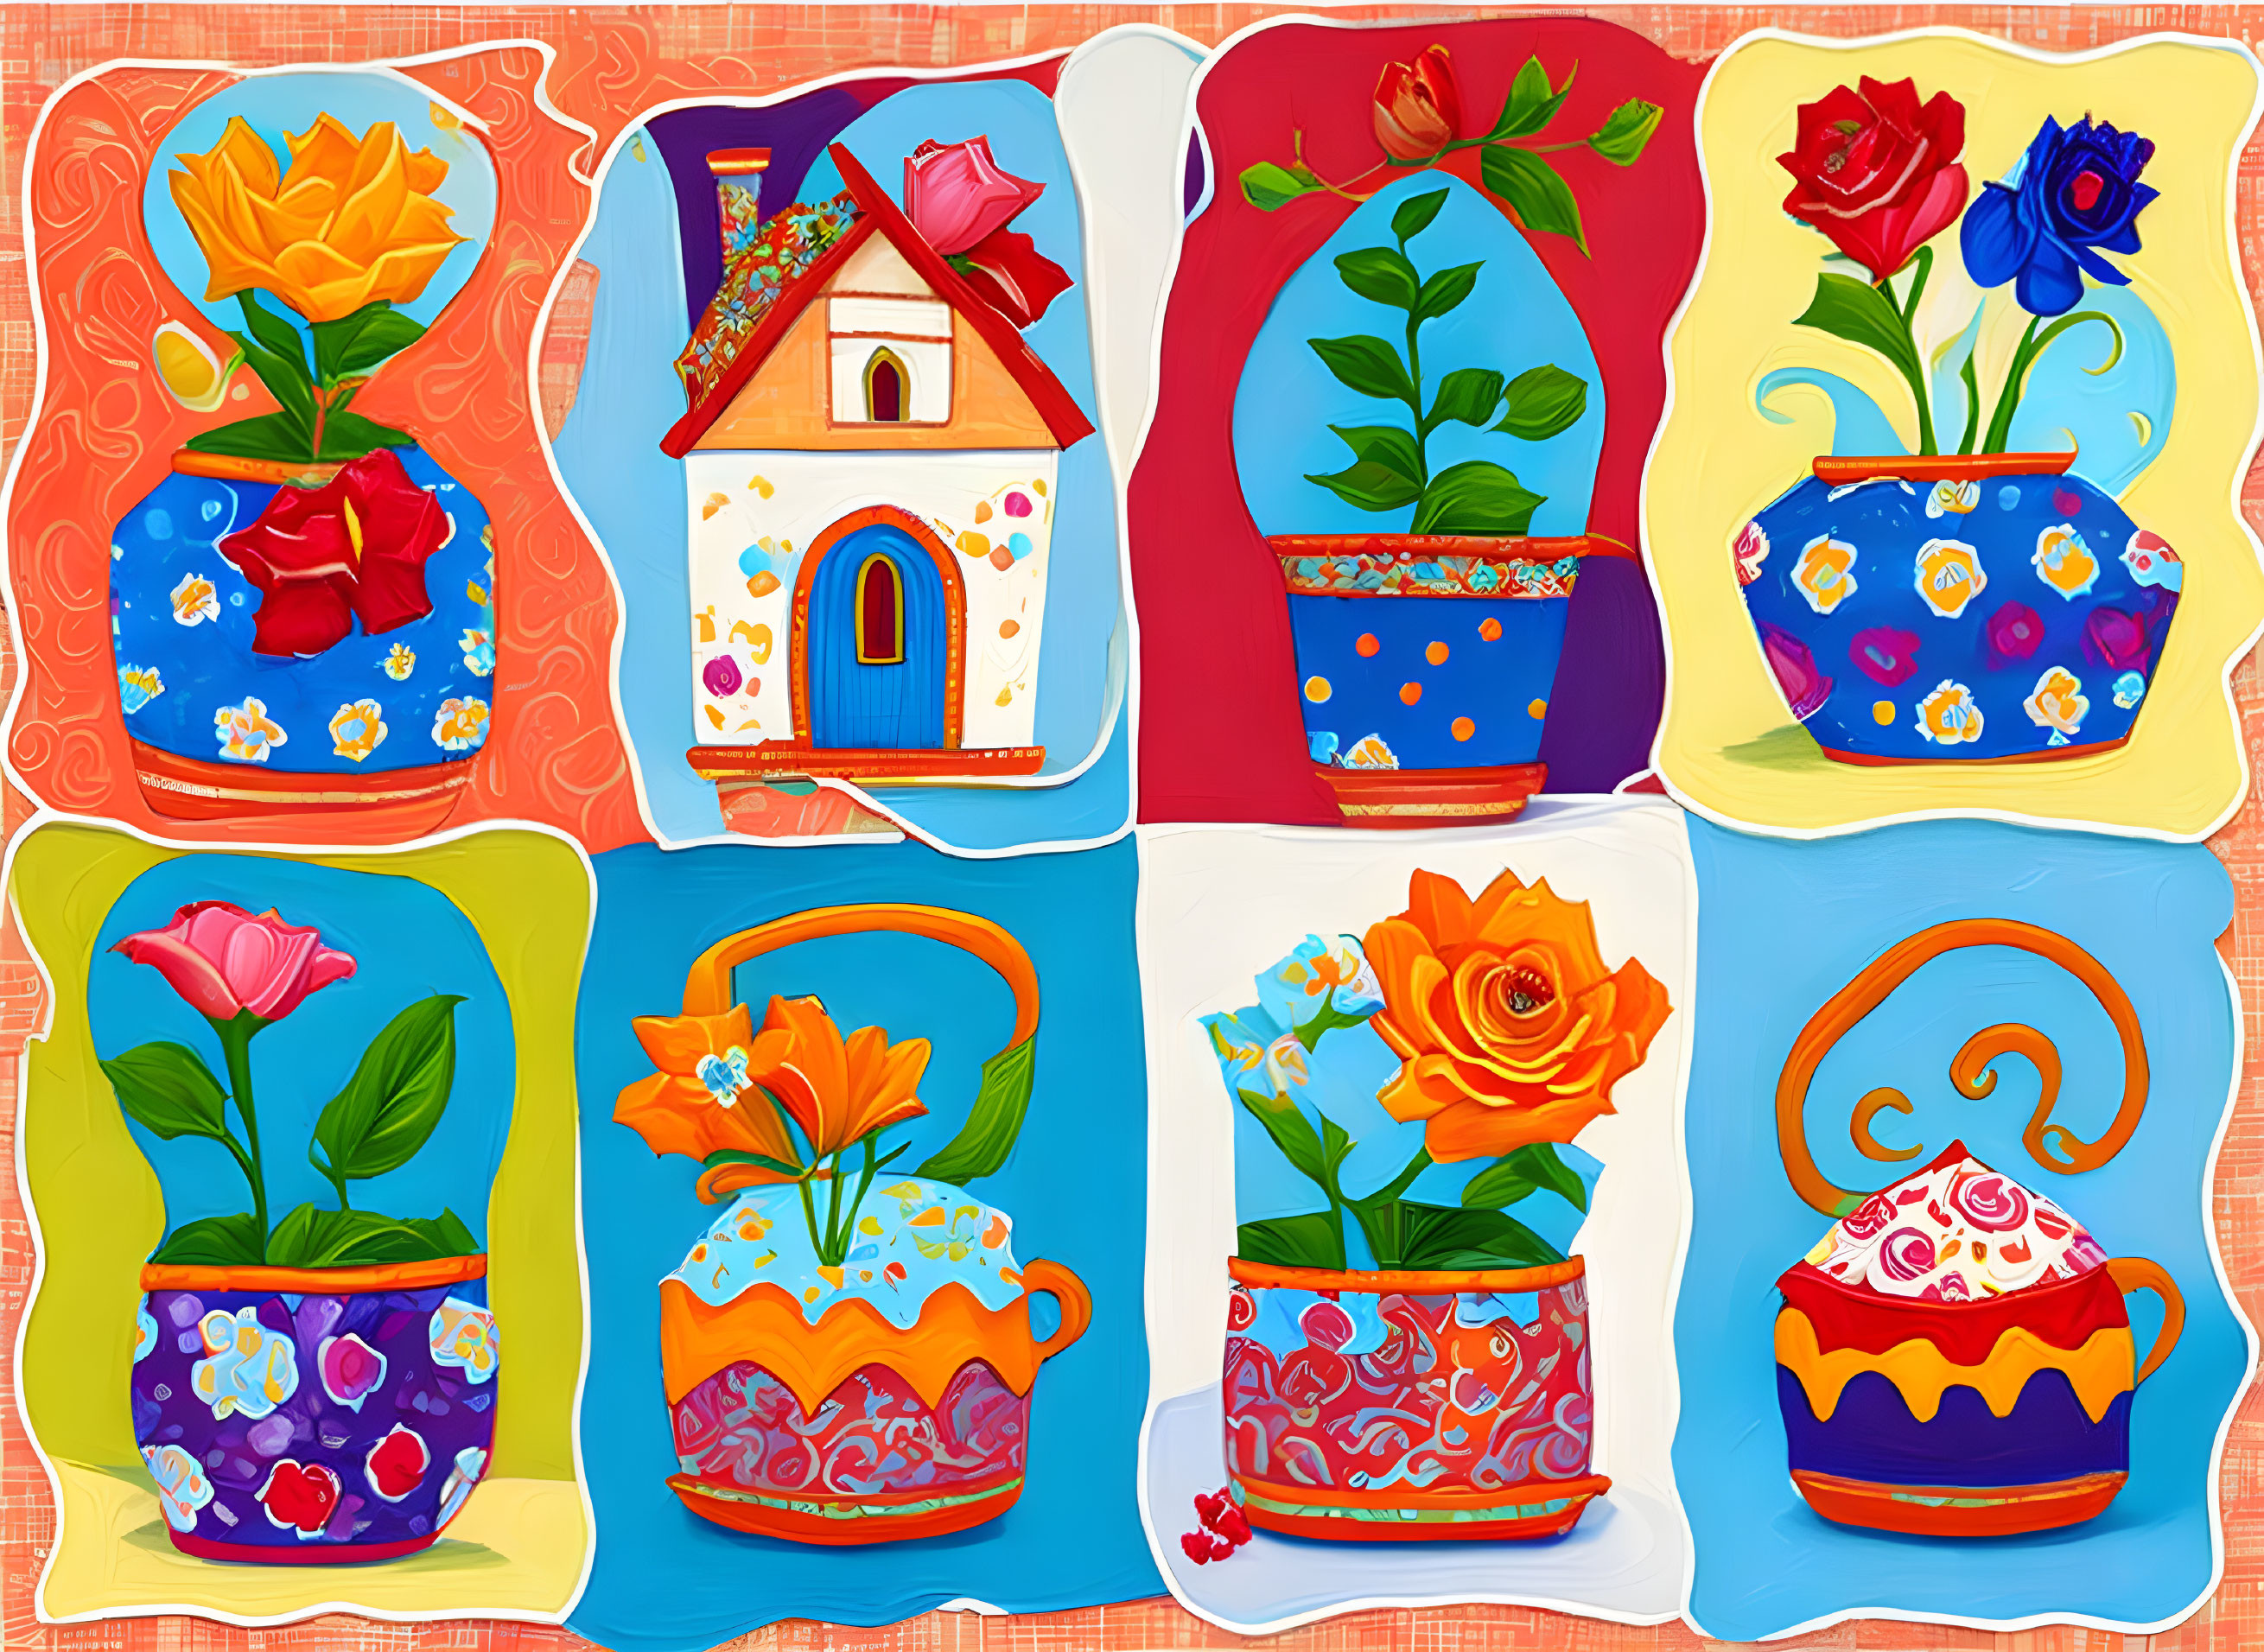 Eight colorful whimsical teapots with flower designs on patterned background